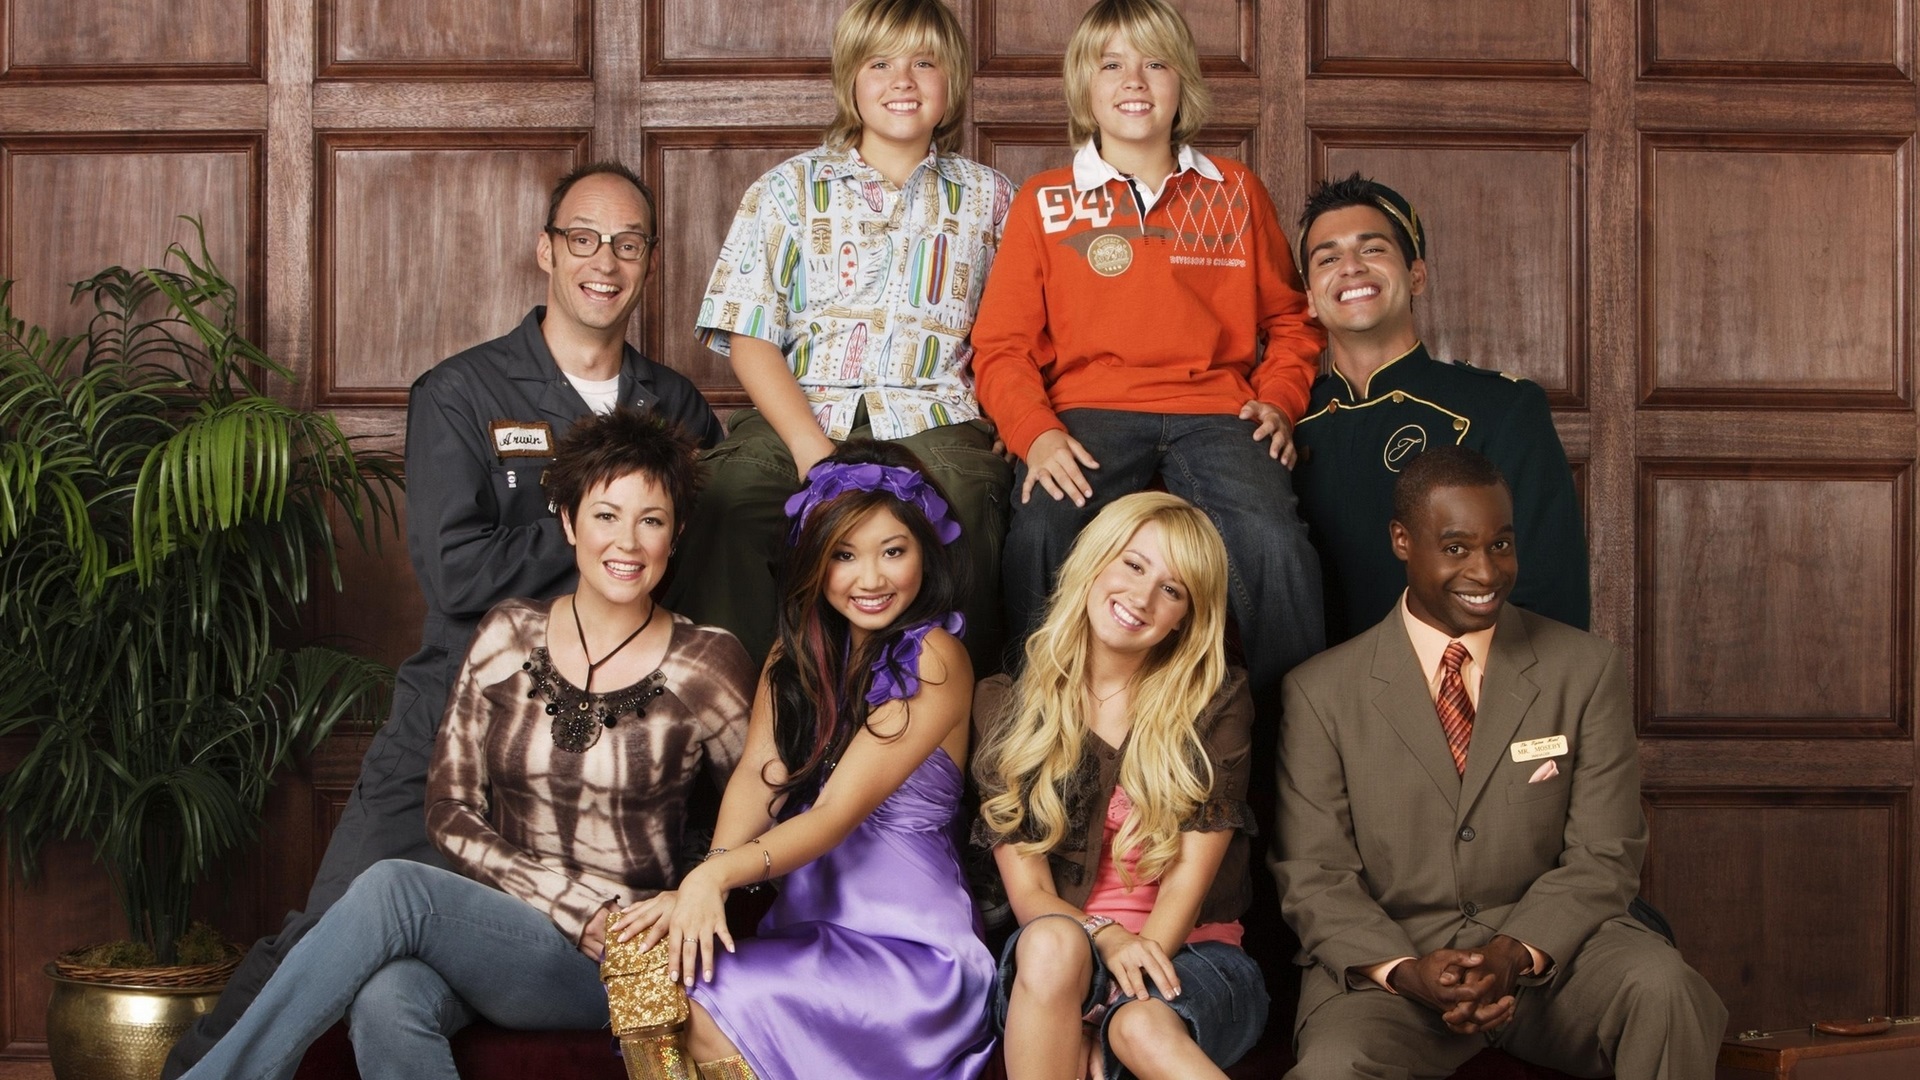 The suite life of zack and cody season 1 download torrent